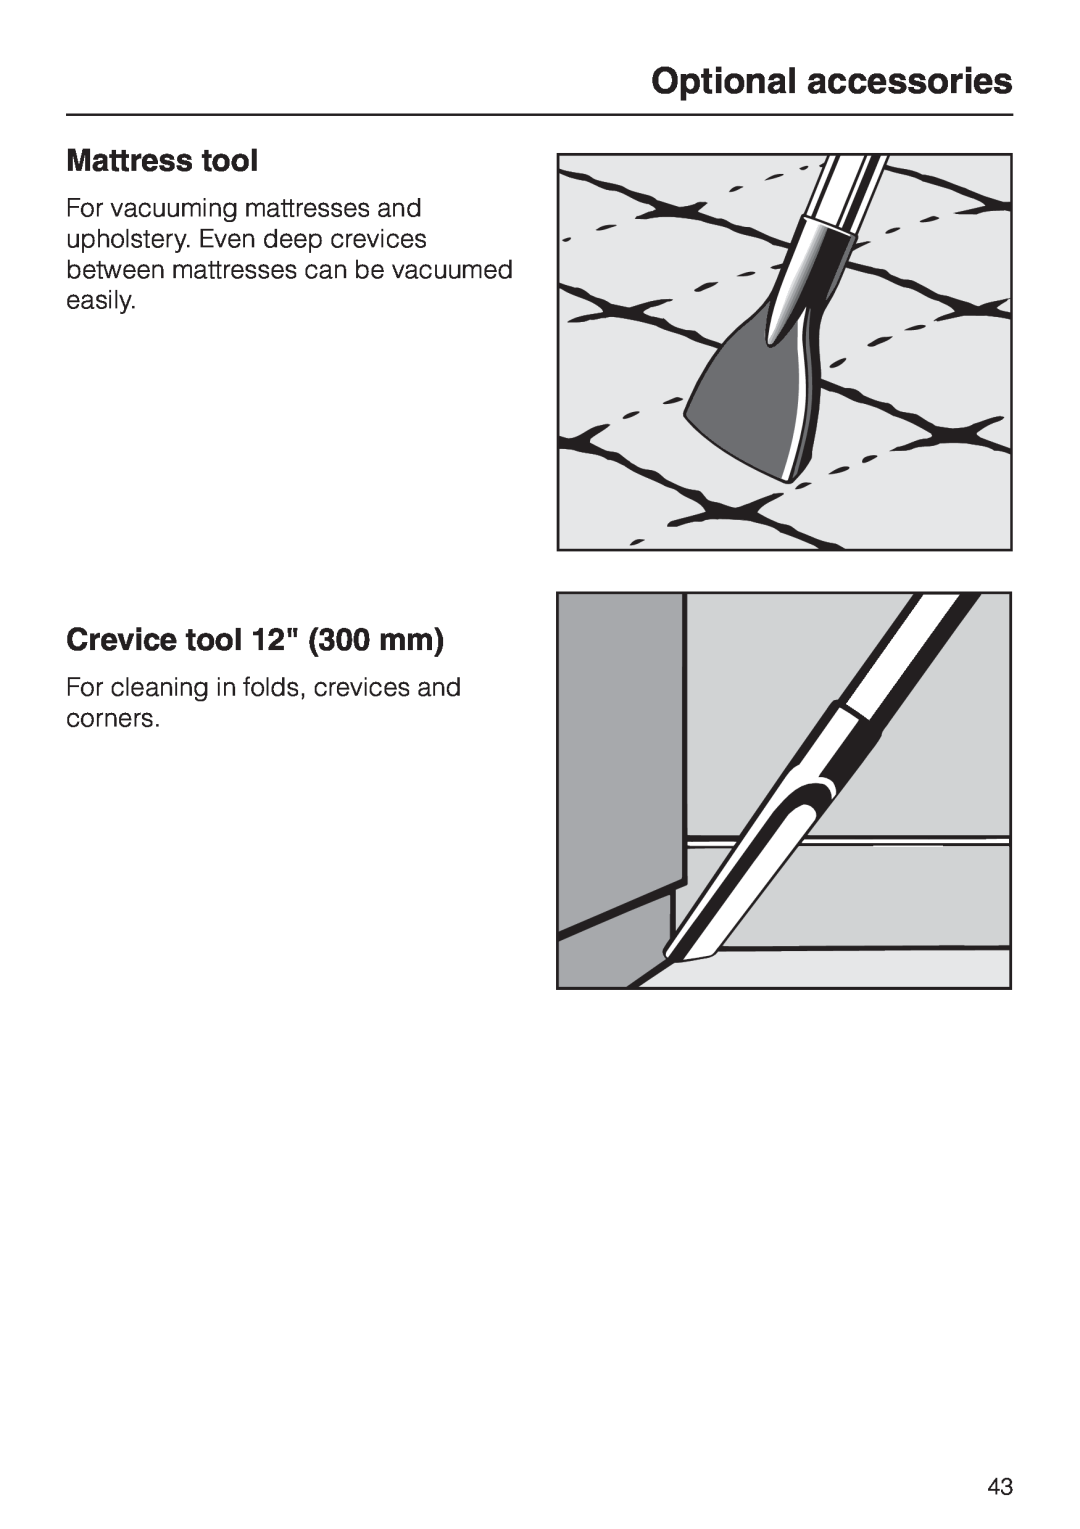 Miele S 558 manual Mattress tool, Crevice tool 12 300 mm, Optional accessories, For cleaning in folds, crevices and corners 